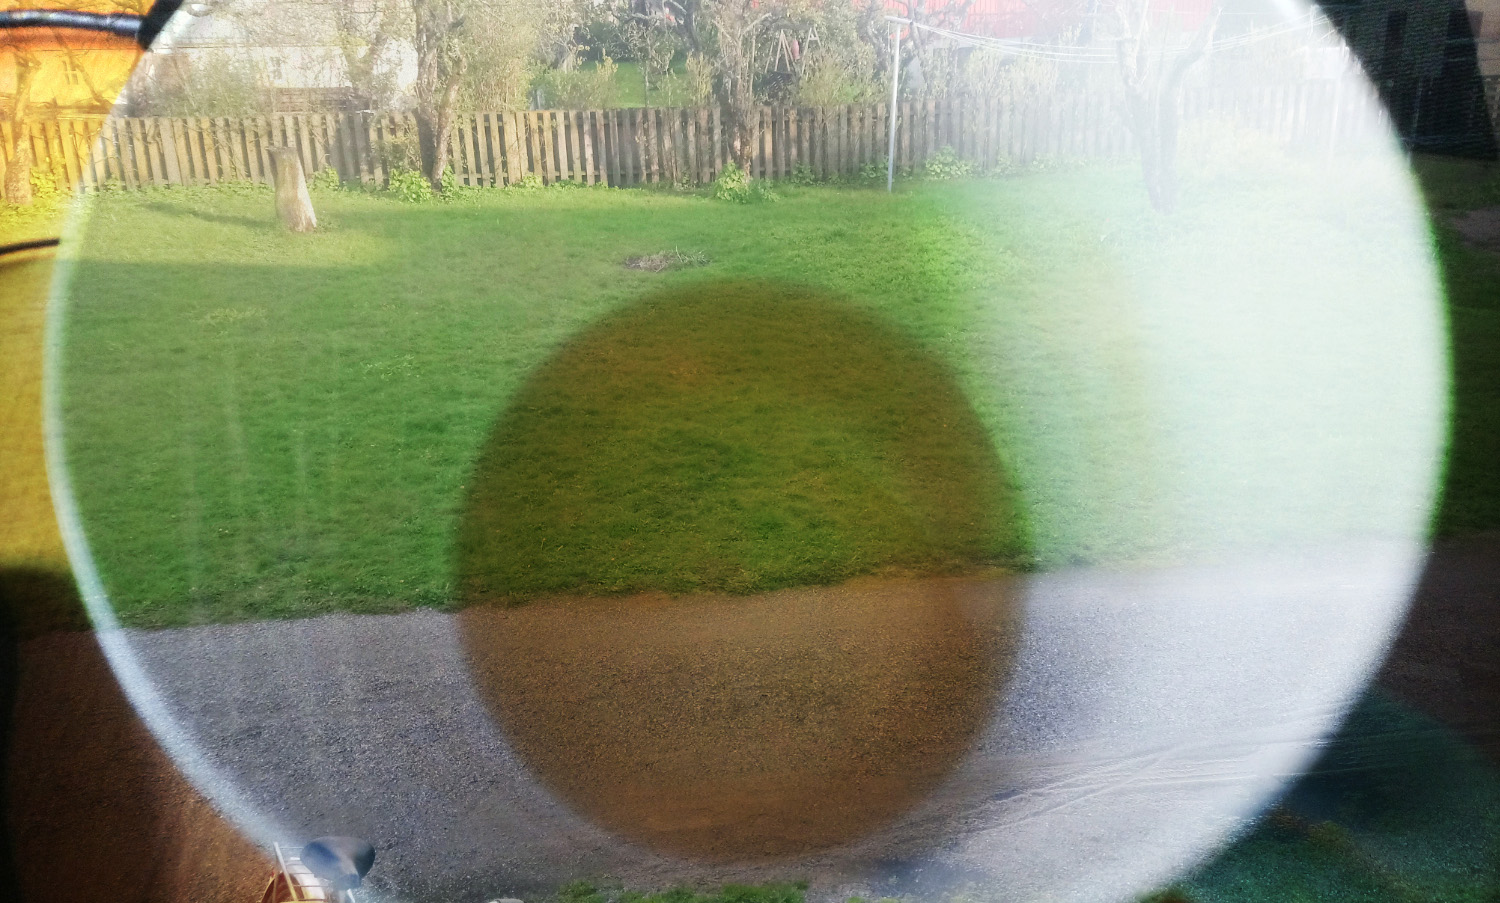 A mug seen from above, image blended
with another one of grass outdoors.